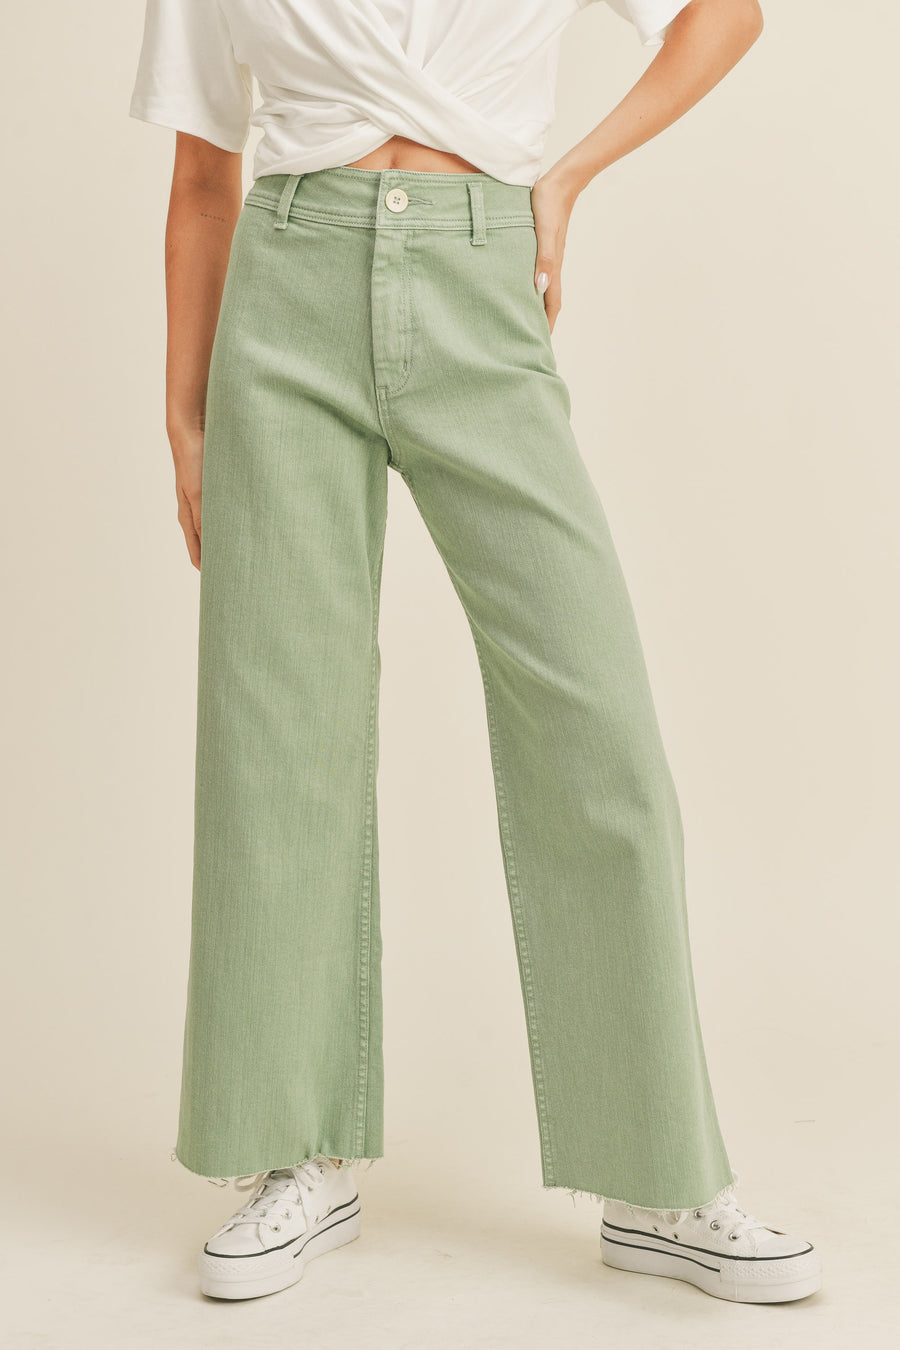 Denim wide leg jeans with an ankle cut int eh color matcha.